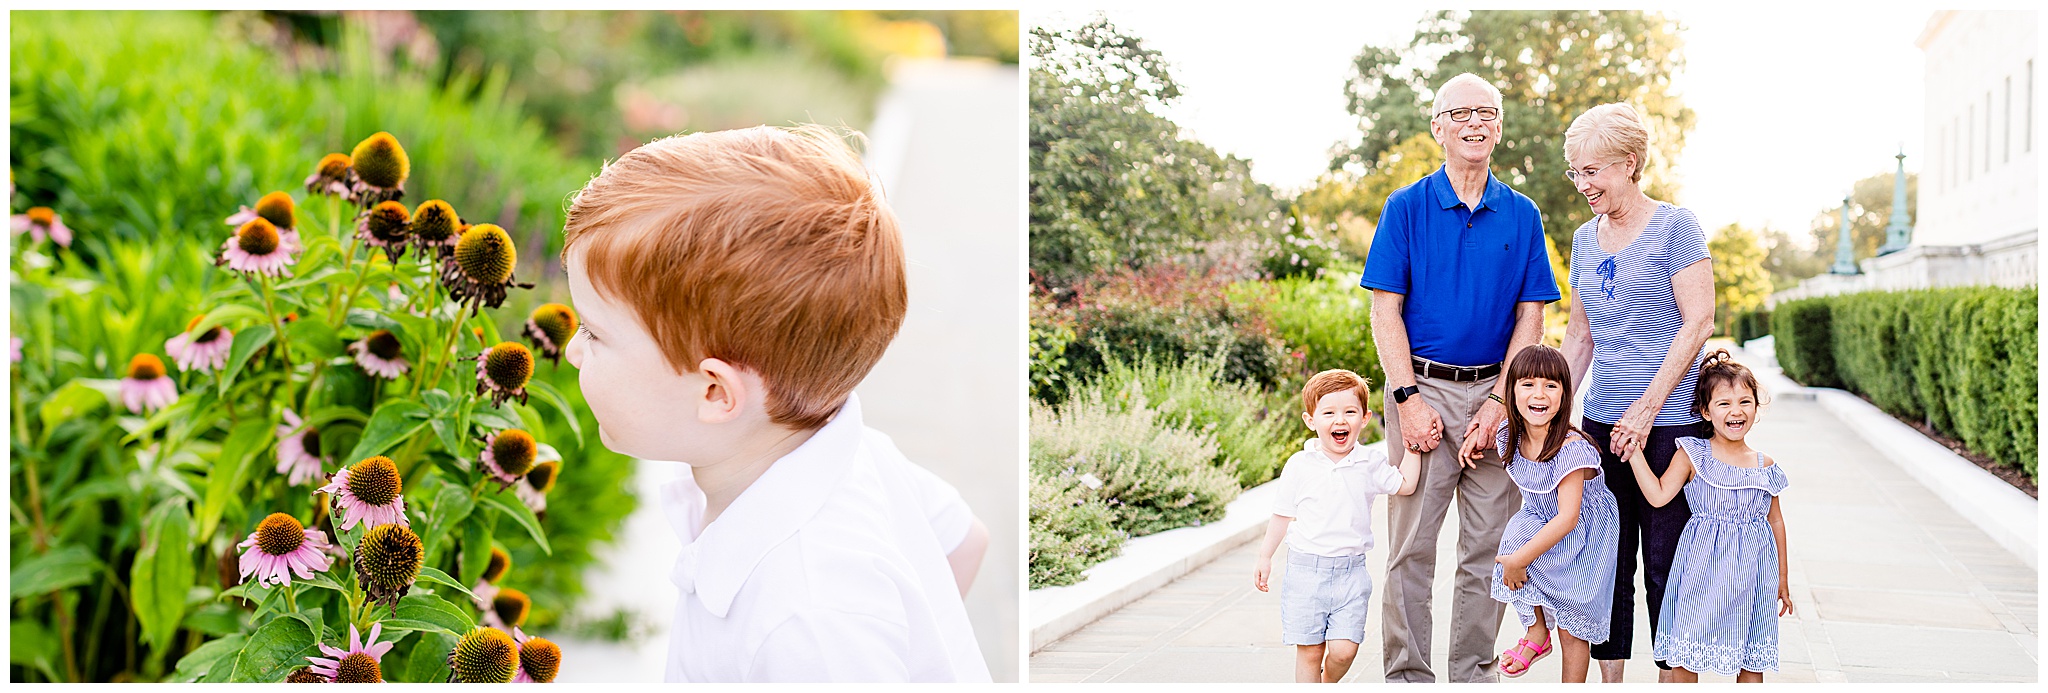 Grandparents Photos at the Supreme Court Garden by Kofmehl Photography